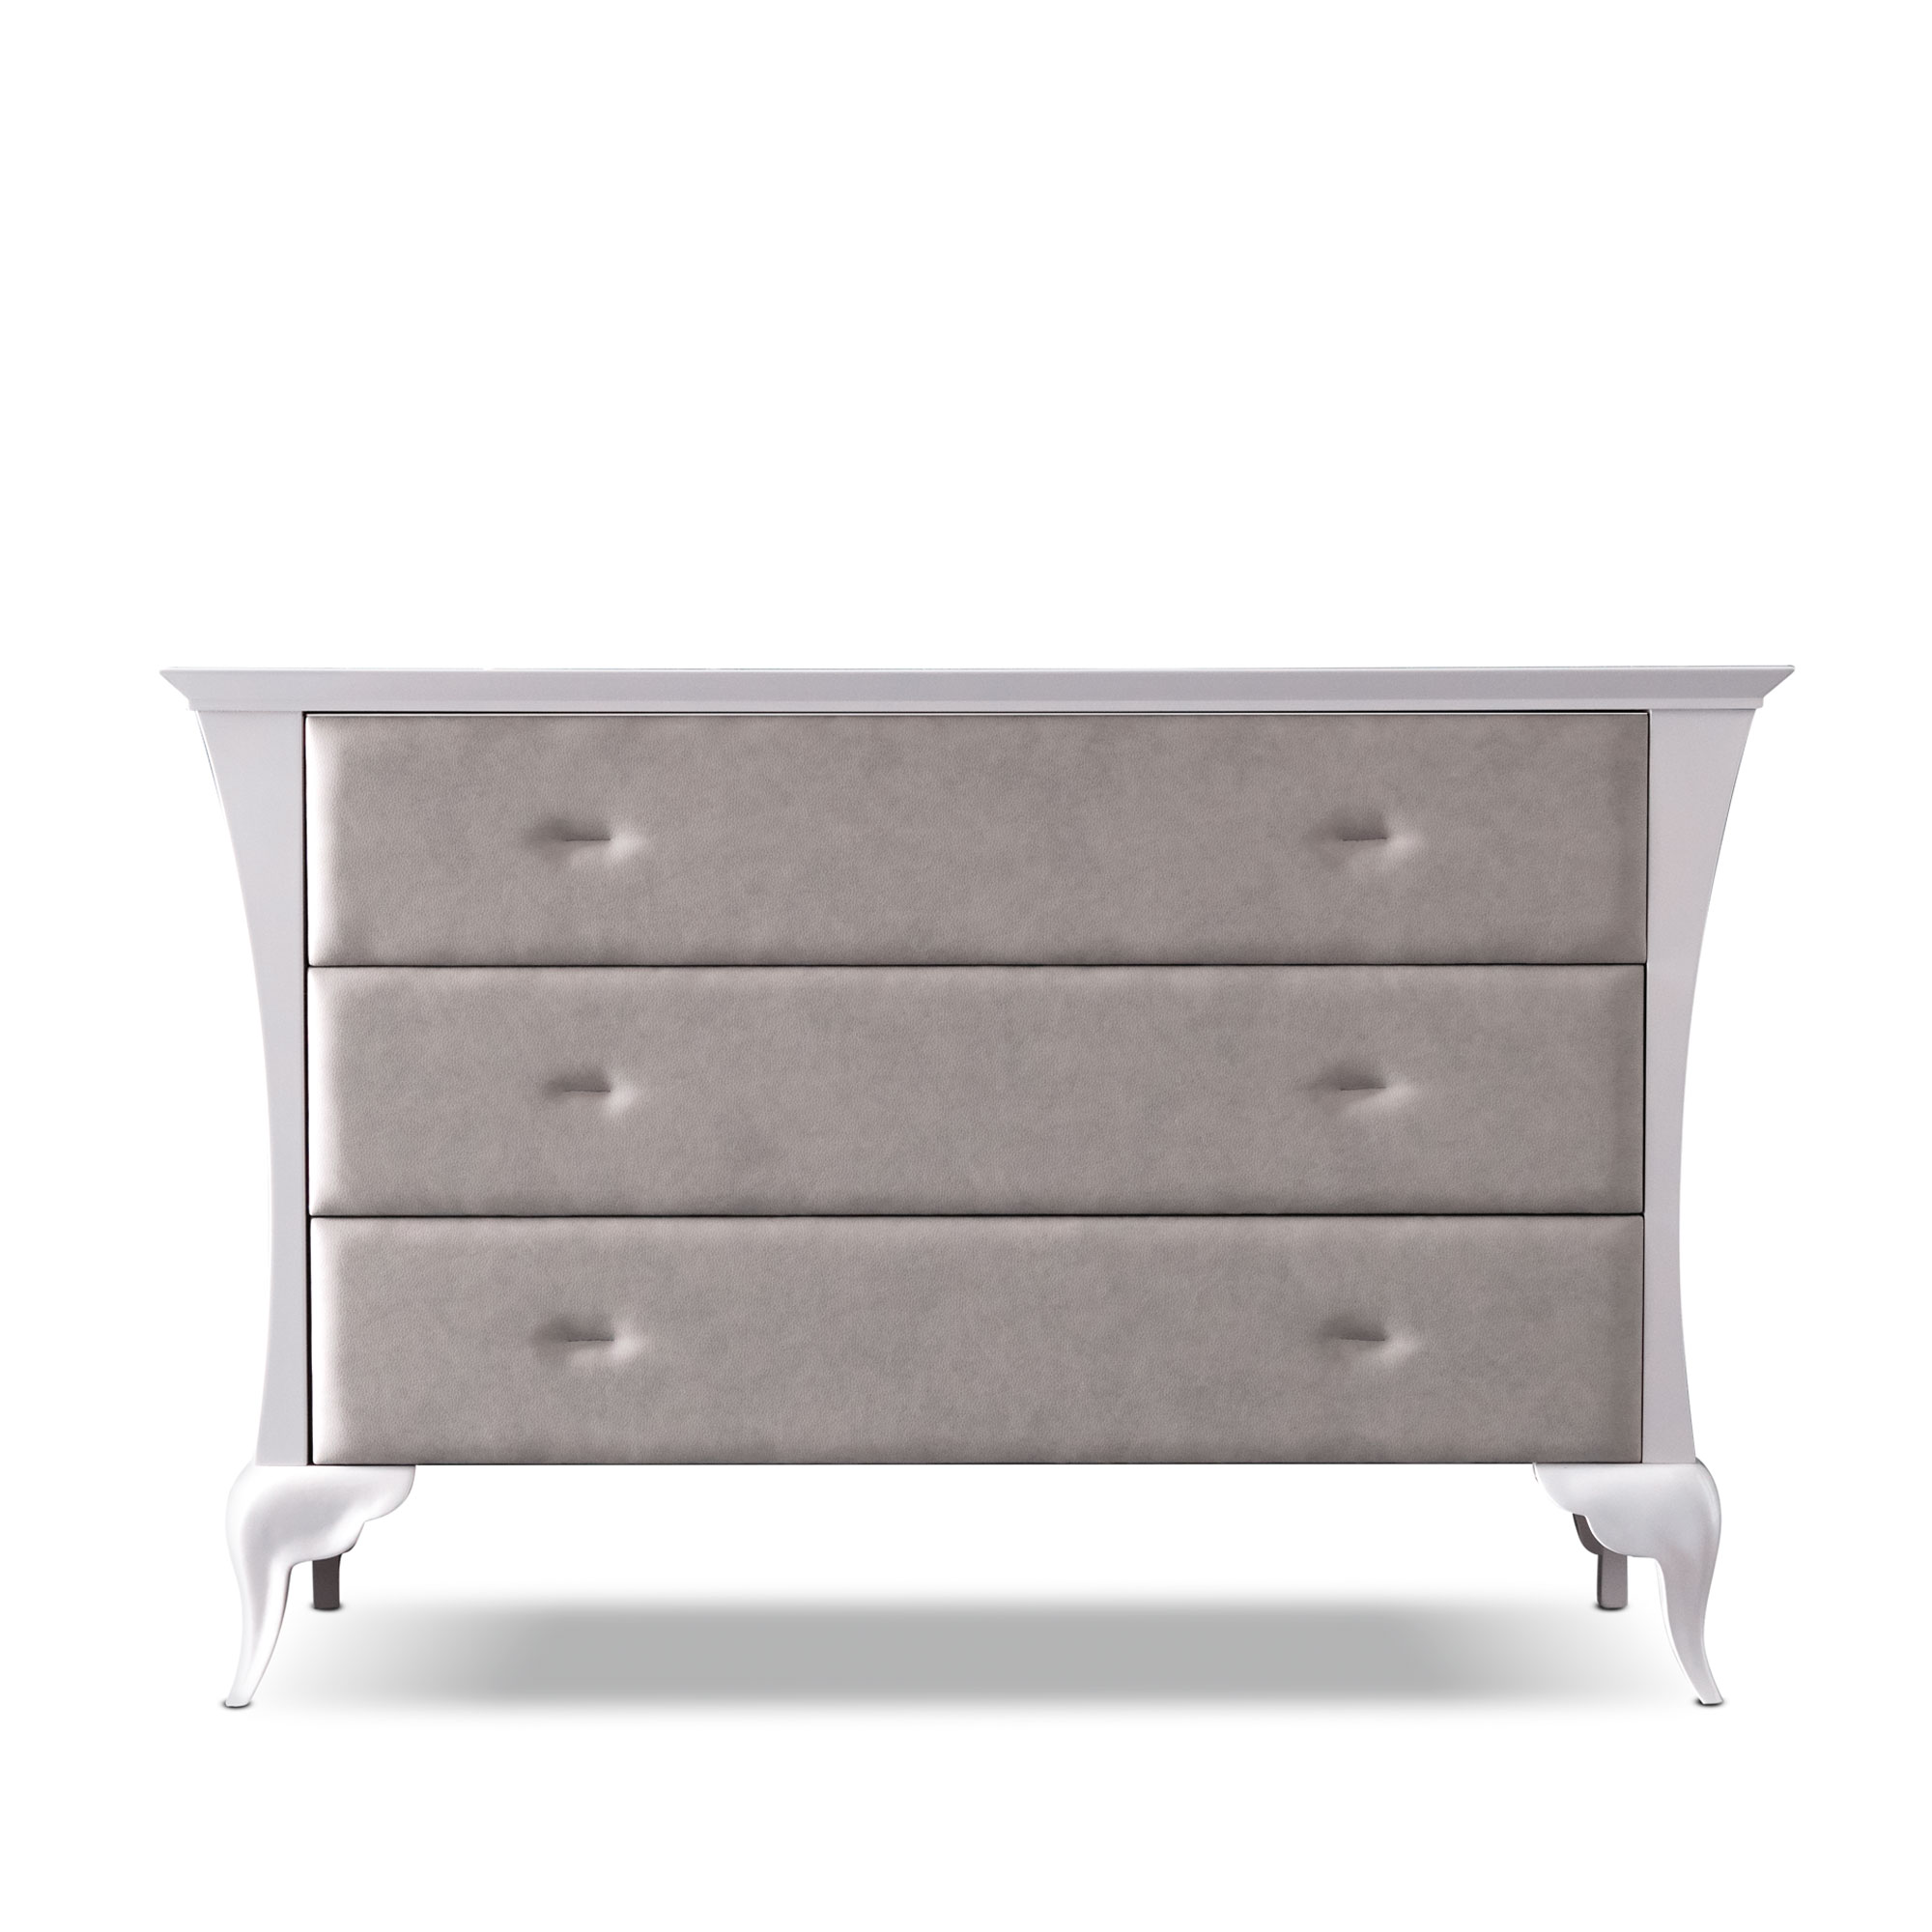 ALICE – SOFT CHEST OF DRAWERS